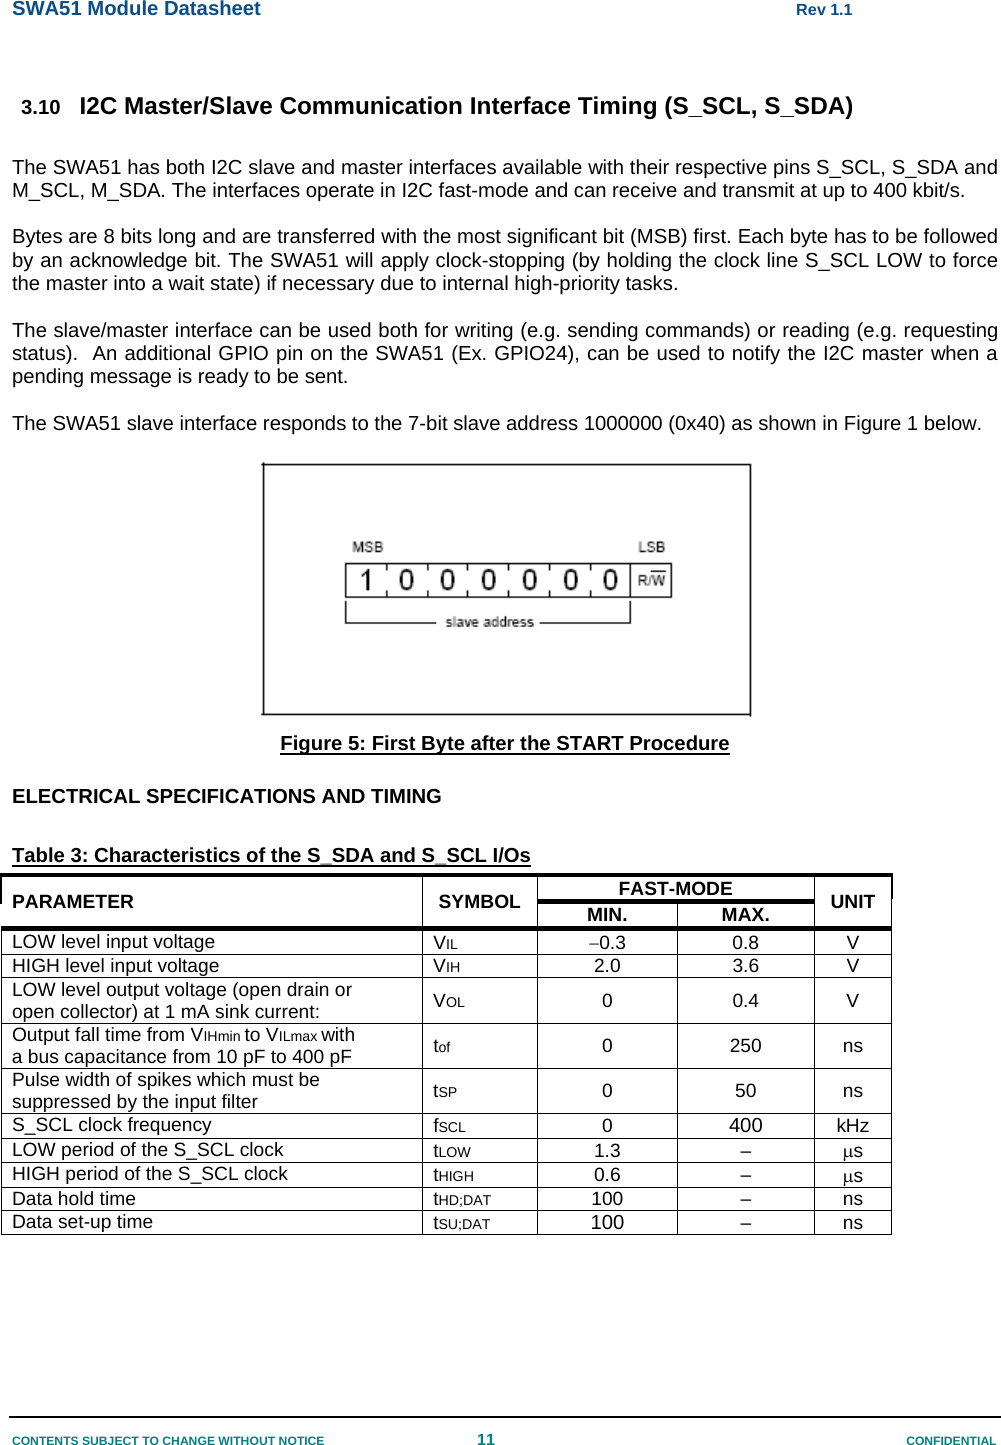 SWA51 Module Datasheet Rev 1.1 CONTENTS SUBJECT TO CHANGE WITHOUT NOTICE 11 CONFIDENTIAL  3.10 I2C Master/Slave Communication Interface Timing (S_SCL, S_SDA)  The SWA51 has both I2C slave and master interfaces available with their respective pins S_SCL, S_SDA and M_SCL, M_SDA. The interfaces operate in I2C fast-mode and can receive and transmit at up to 400 kbit/s.  Bytes are 8 bits long and are transferred with the most significant bit (MSB) first. Each byte has to be followed by an acknowledge bit. The SWA51 will apply clock-stopping (by holding the clock line S_SCL LOW to force the master into a wait state) if necessary due to internal high-priority tasks.  The slave/master interface can be used both for writing (e.g. sending commands) or reading (e.g. requesting status).  An additional GPIO pin on the SWA51 (Ex. GPIO24), can be used to notify the I2C master when a pending message is ready to be sent.  The SWA51 slave interface responds to the 7-bit slave address 1000000 (0x40) as shown in Figure 1 below.   Figure 5: First Byte after the START Procedure  ELECTRICAL SPECIFICATIONS AND TIMING  Table 3: Characteristics of the S_SDA and S_SCL I/Os PARAMETER SYMBOL  FAST-MODE UNIT MIN. MAX. LOW level input voltage VIL 0.3  0.8 V HIGH level input voltage  VIH 2.0 3.6 V LOW level output voltage (open drain or open collector) at 1 mA sink current:  VOL 0 0.4 V Output fall time from VIHmin to VILmax with a bus capacitance from 10 pF to 400 pF tof 0 250 ns Pulse width of spikes which must be suppressed by the input filter  tSP 0 50 ns S_SCL clock frequency  fSCL 0 400 kHz LOW period of the S_SCL clock tLOW 1.3 – s HIGH period of the S_SCL clock tHIGH 0.6 – s Data hold time  tHD;DAT 100 – ns Data set-up time tSU;DAT 100 – ns  